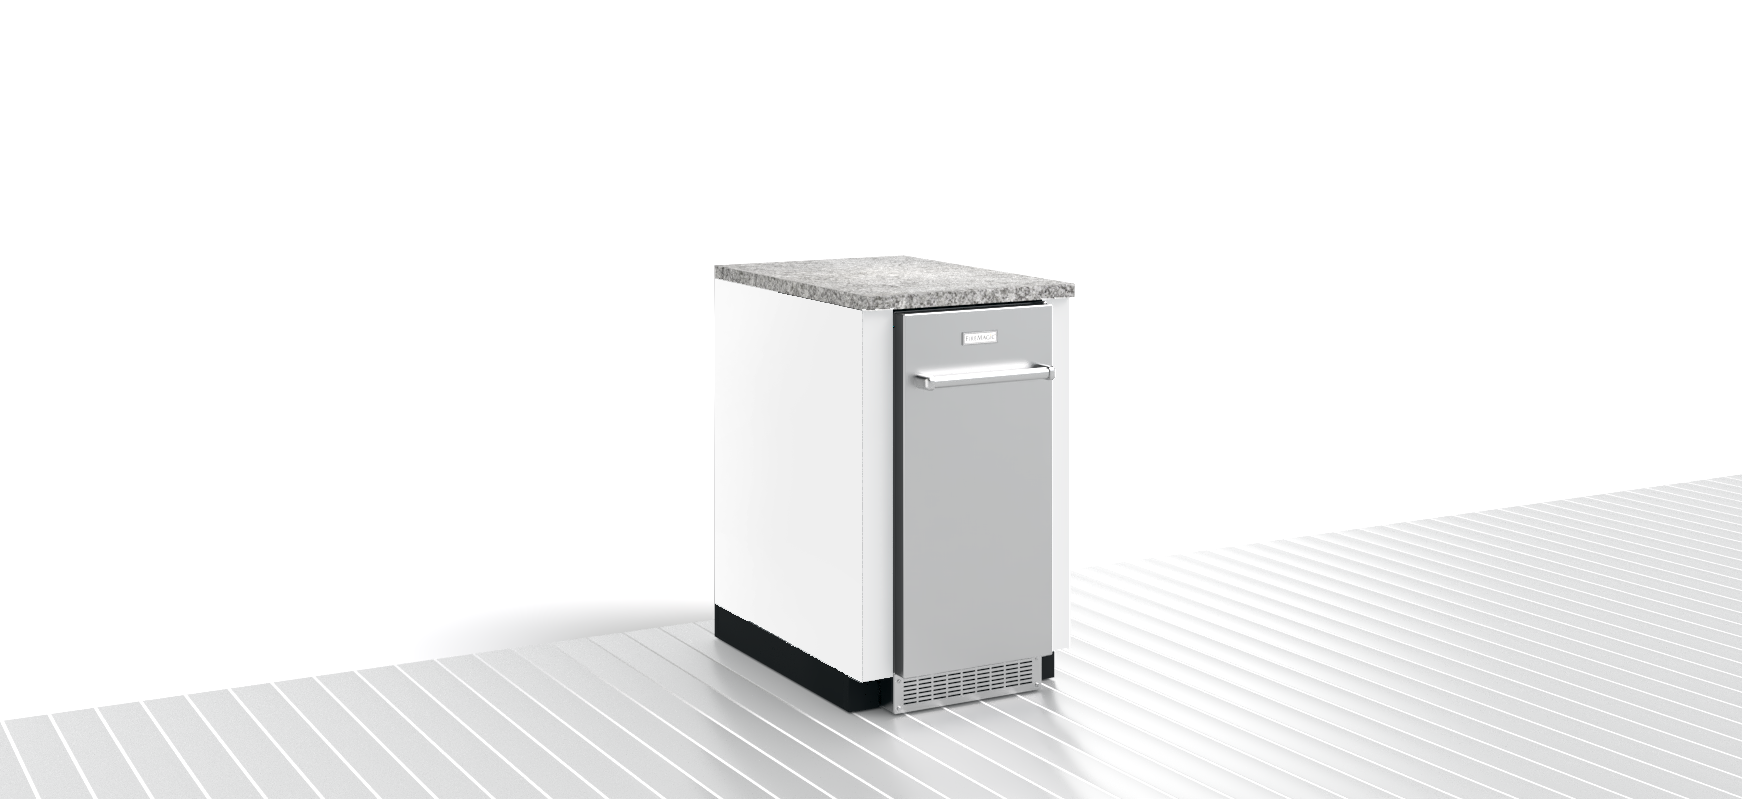 Ice Maker Cabinets